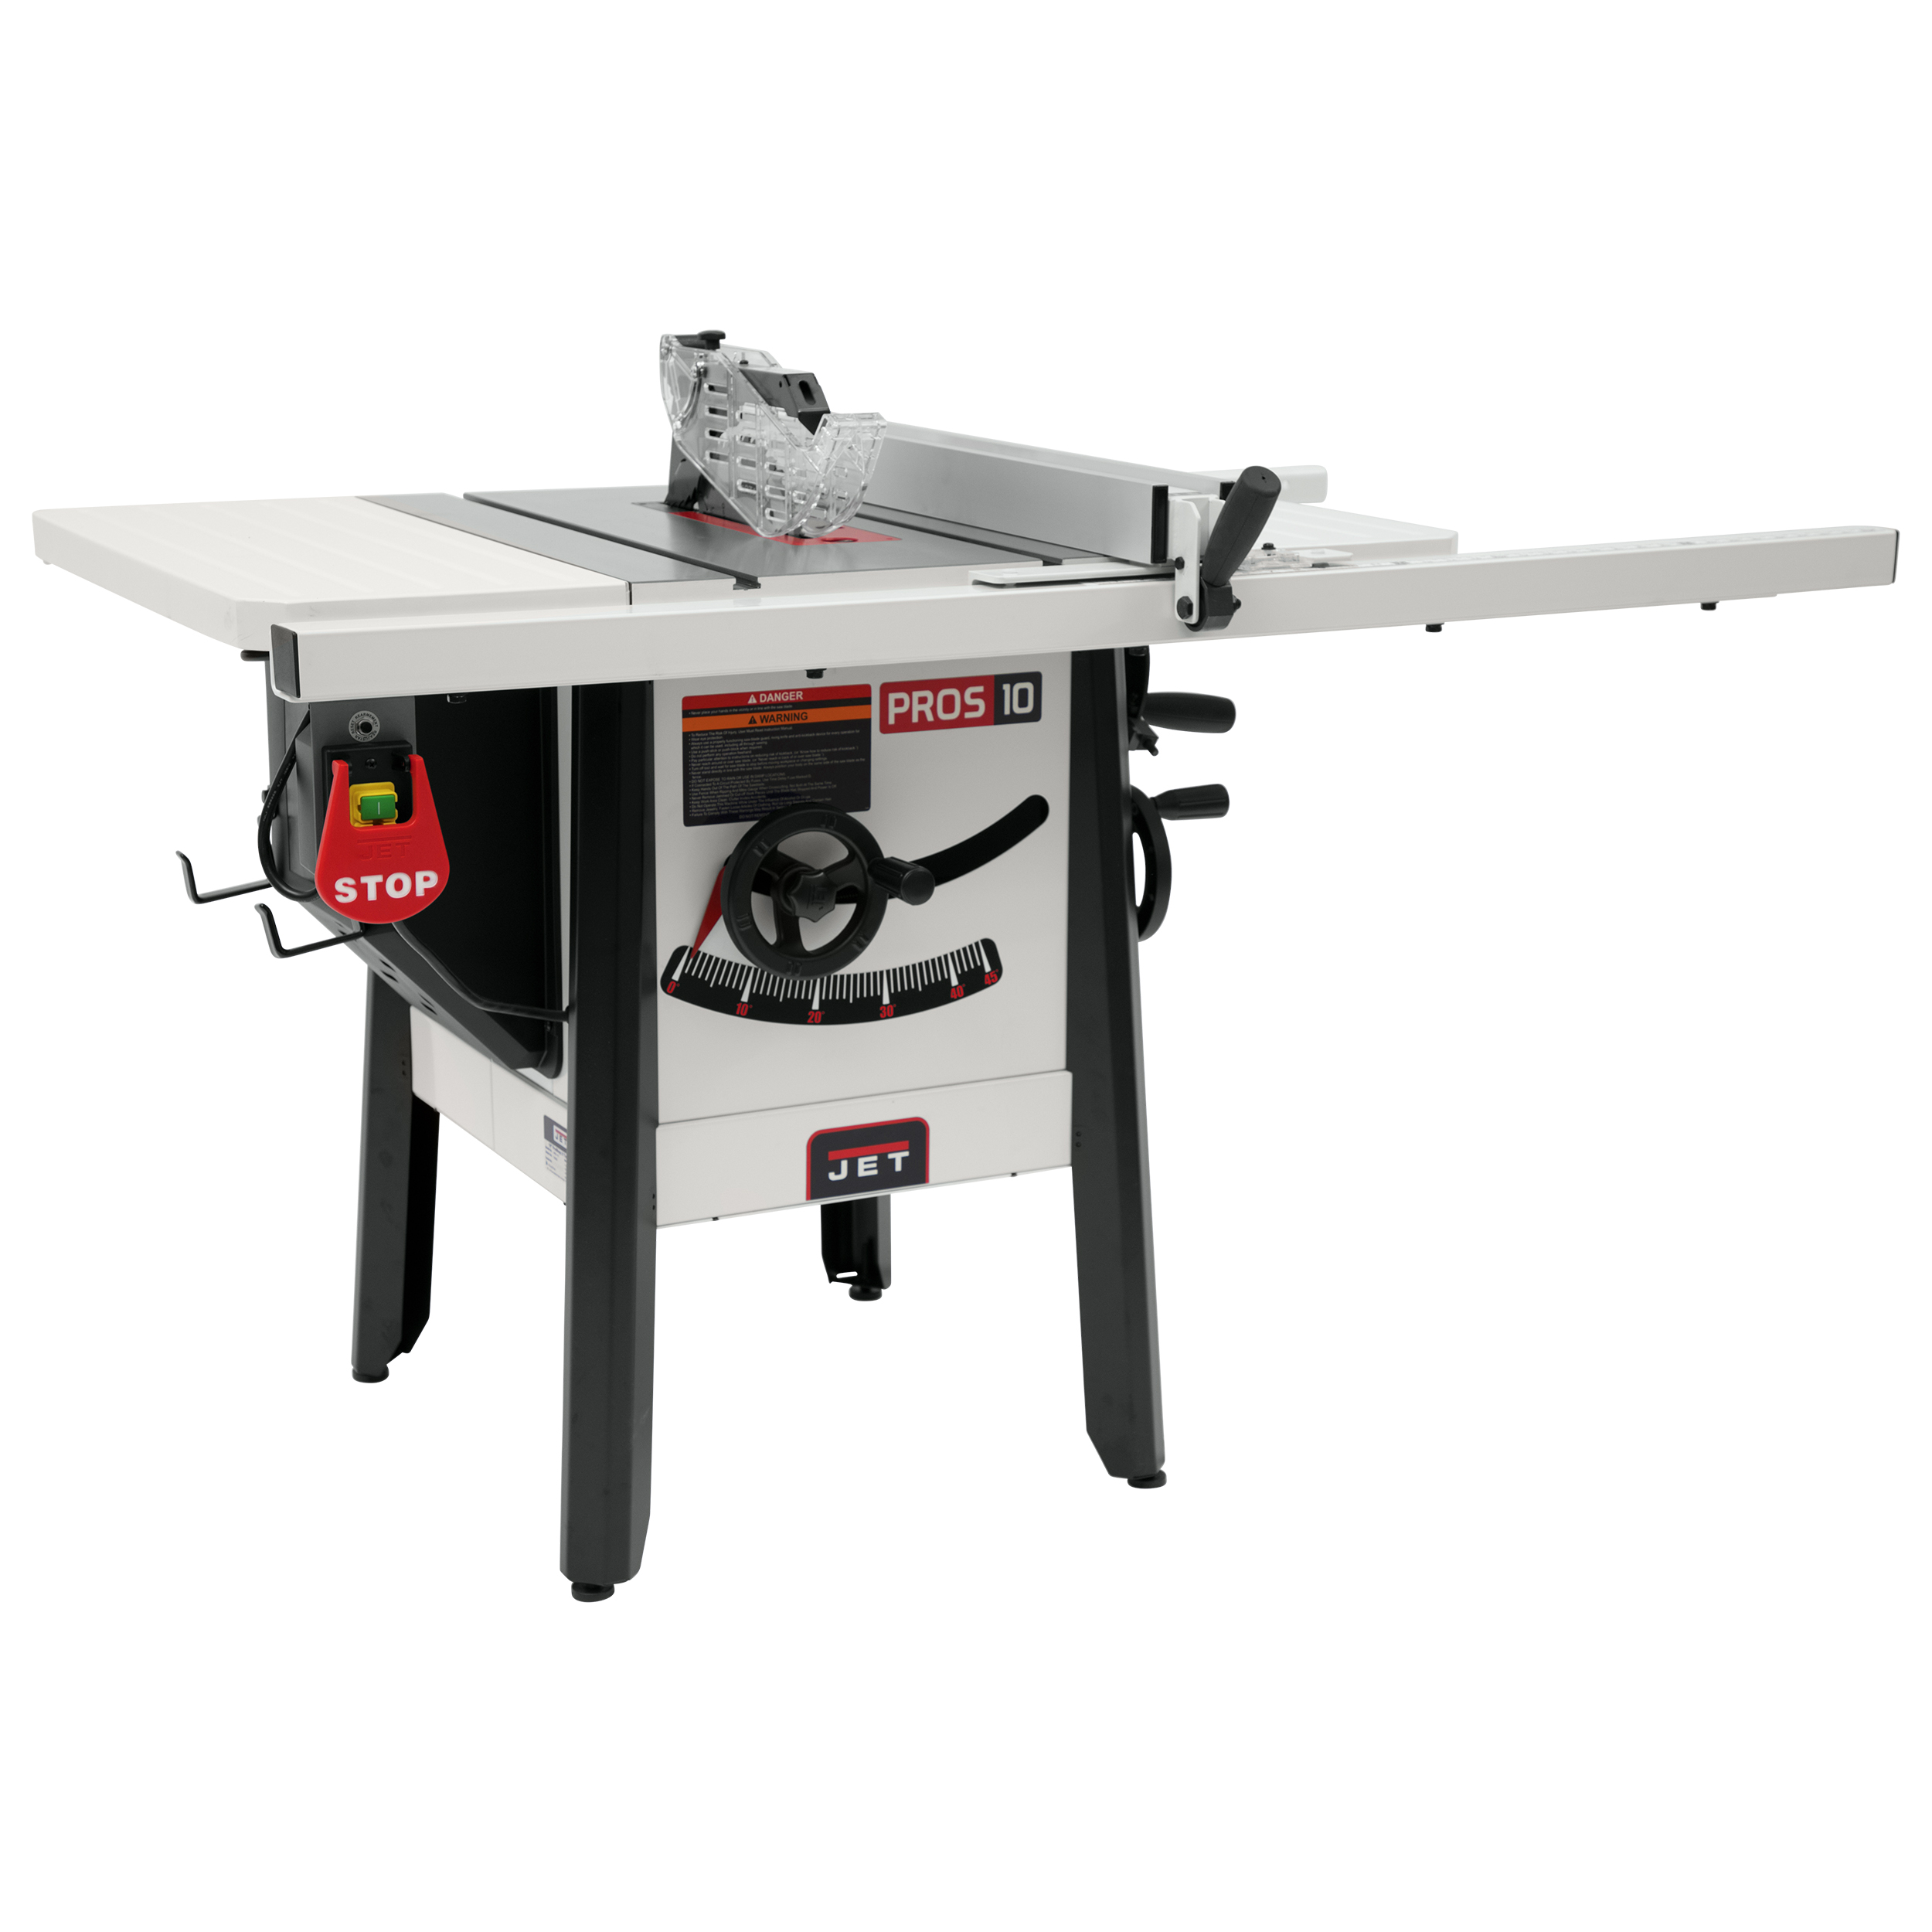 Proshop Ii Table Saw With Stamped Steel Wings, 115v, 30" Rip